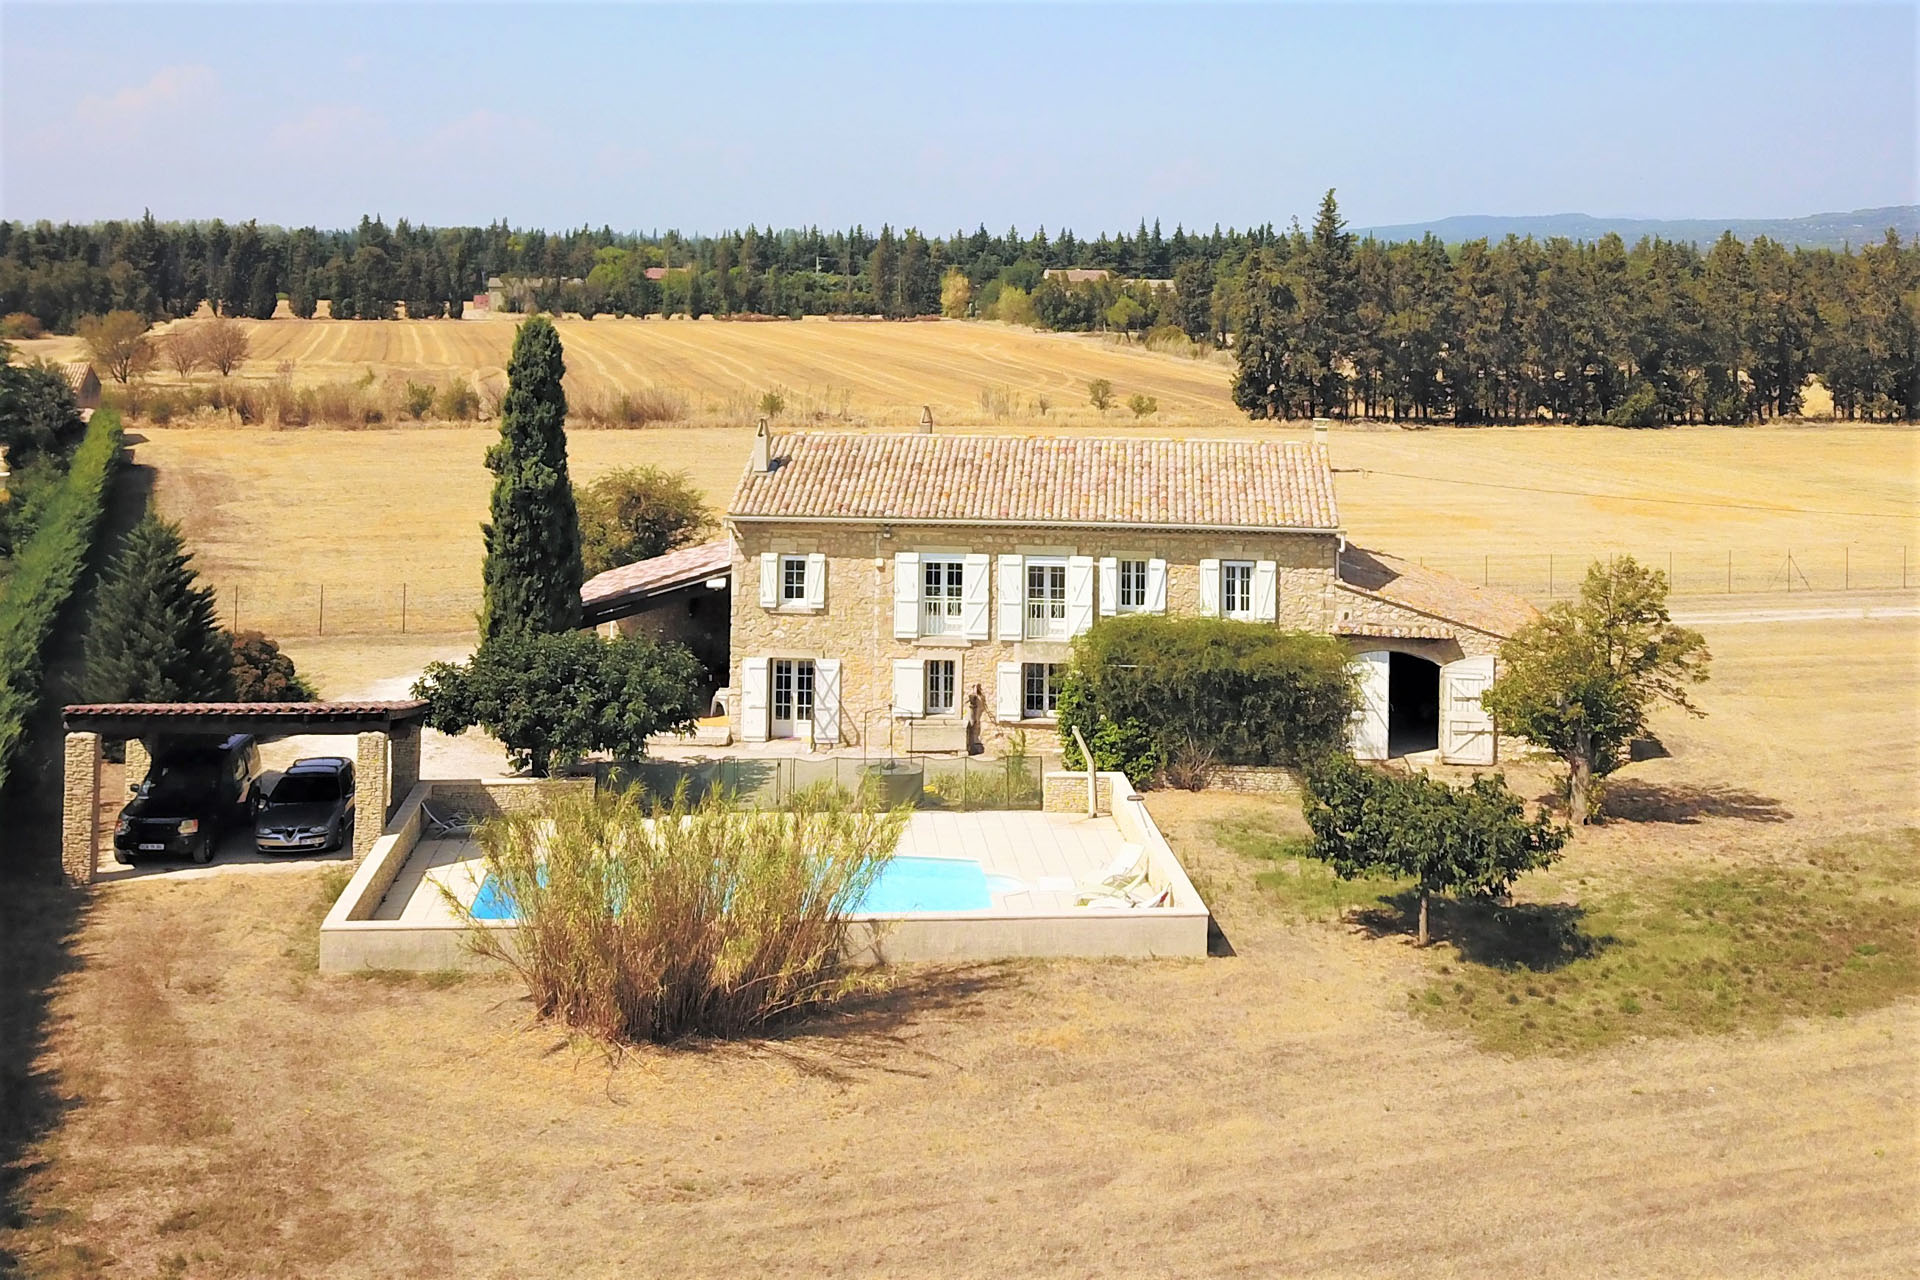 Near Luberon, mas for sale with swimming pool on 1.4 hectare of land.